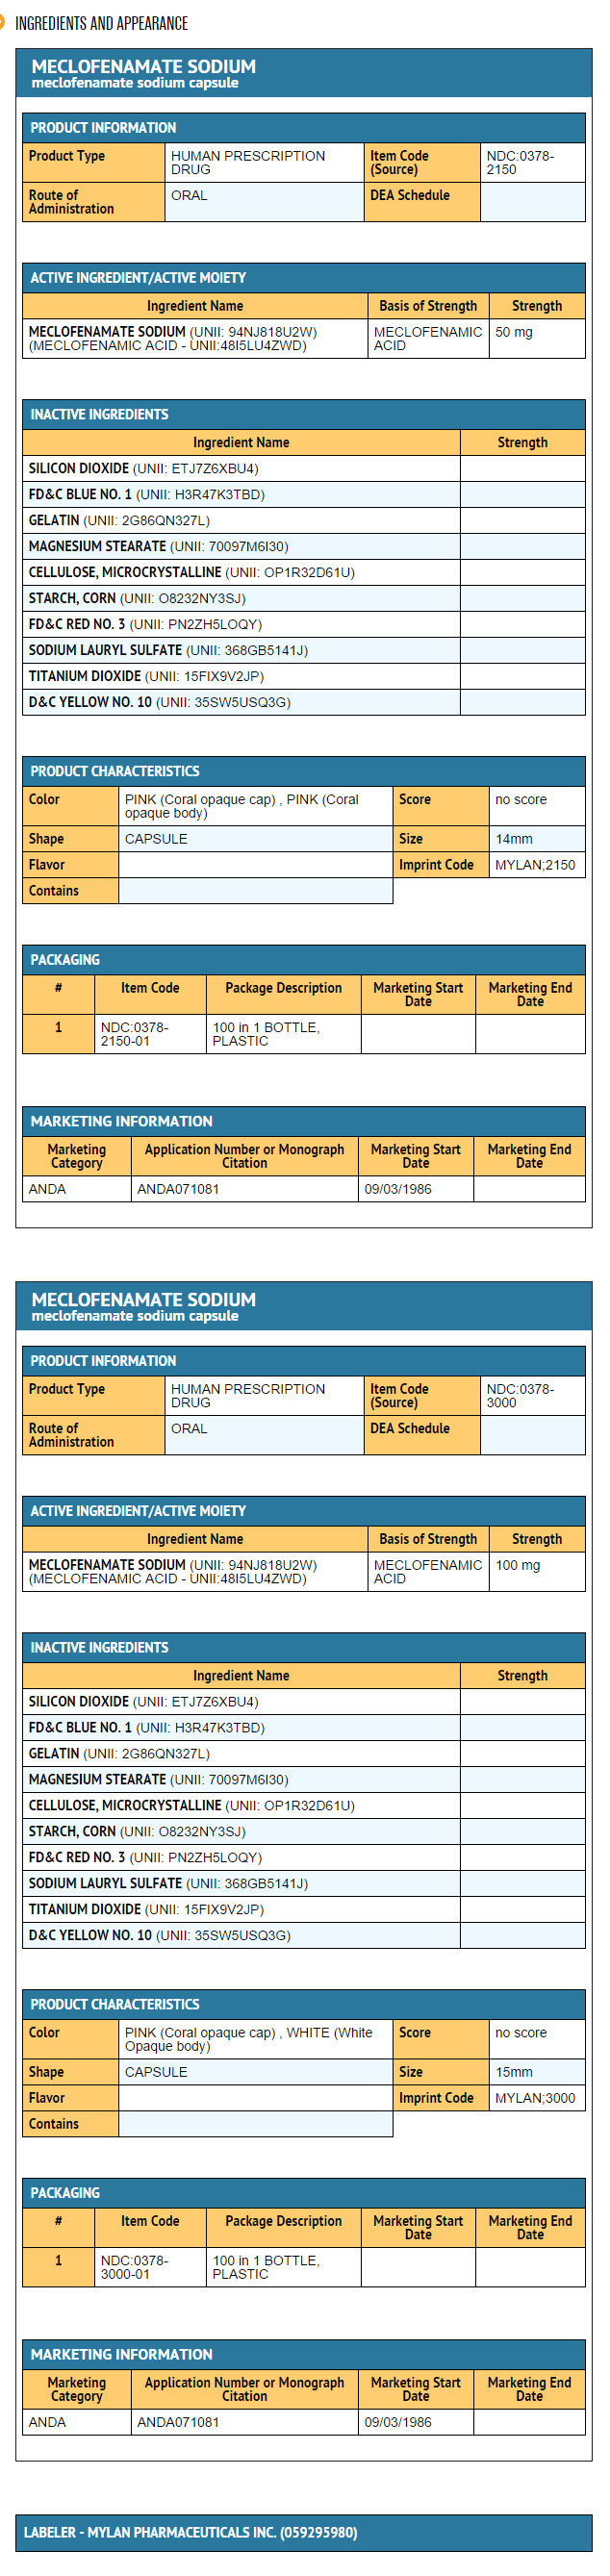 File:Meclofenamate sodium ingredients and appearance.png